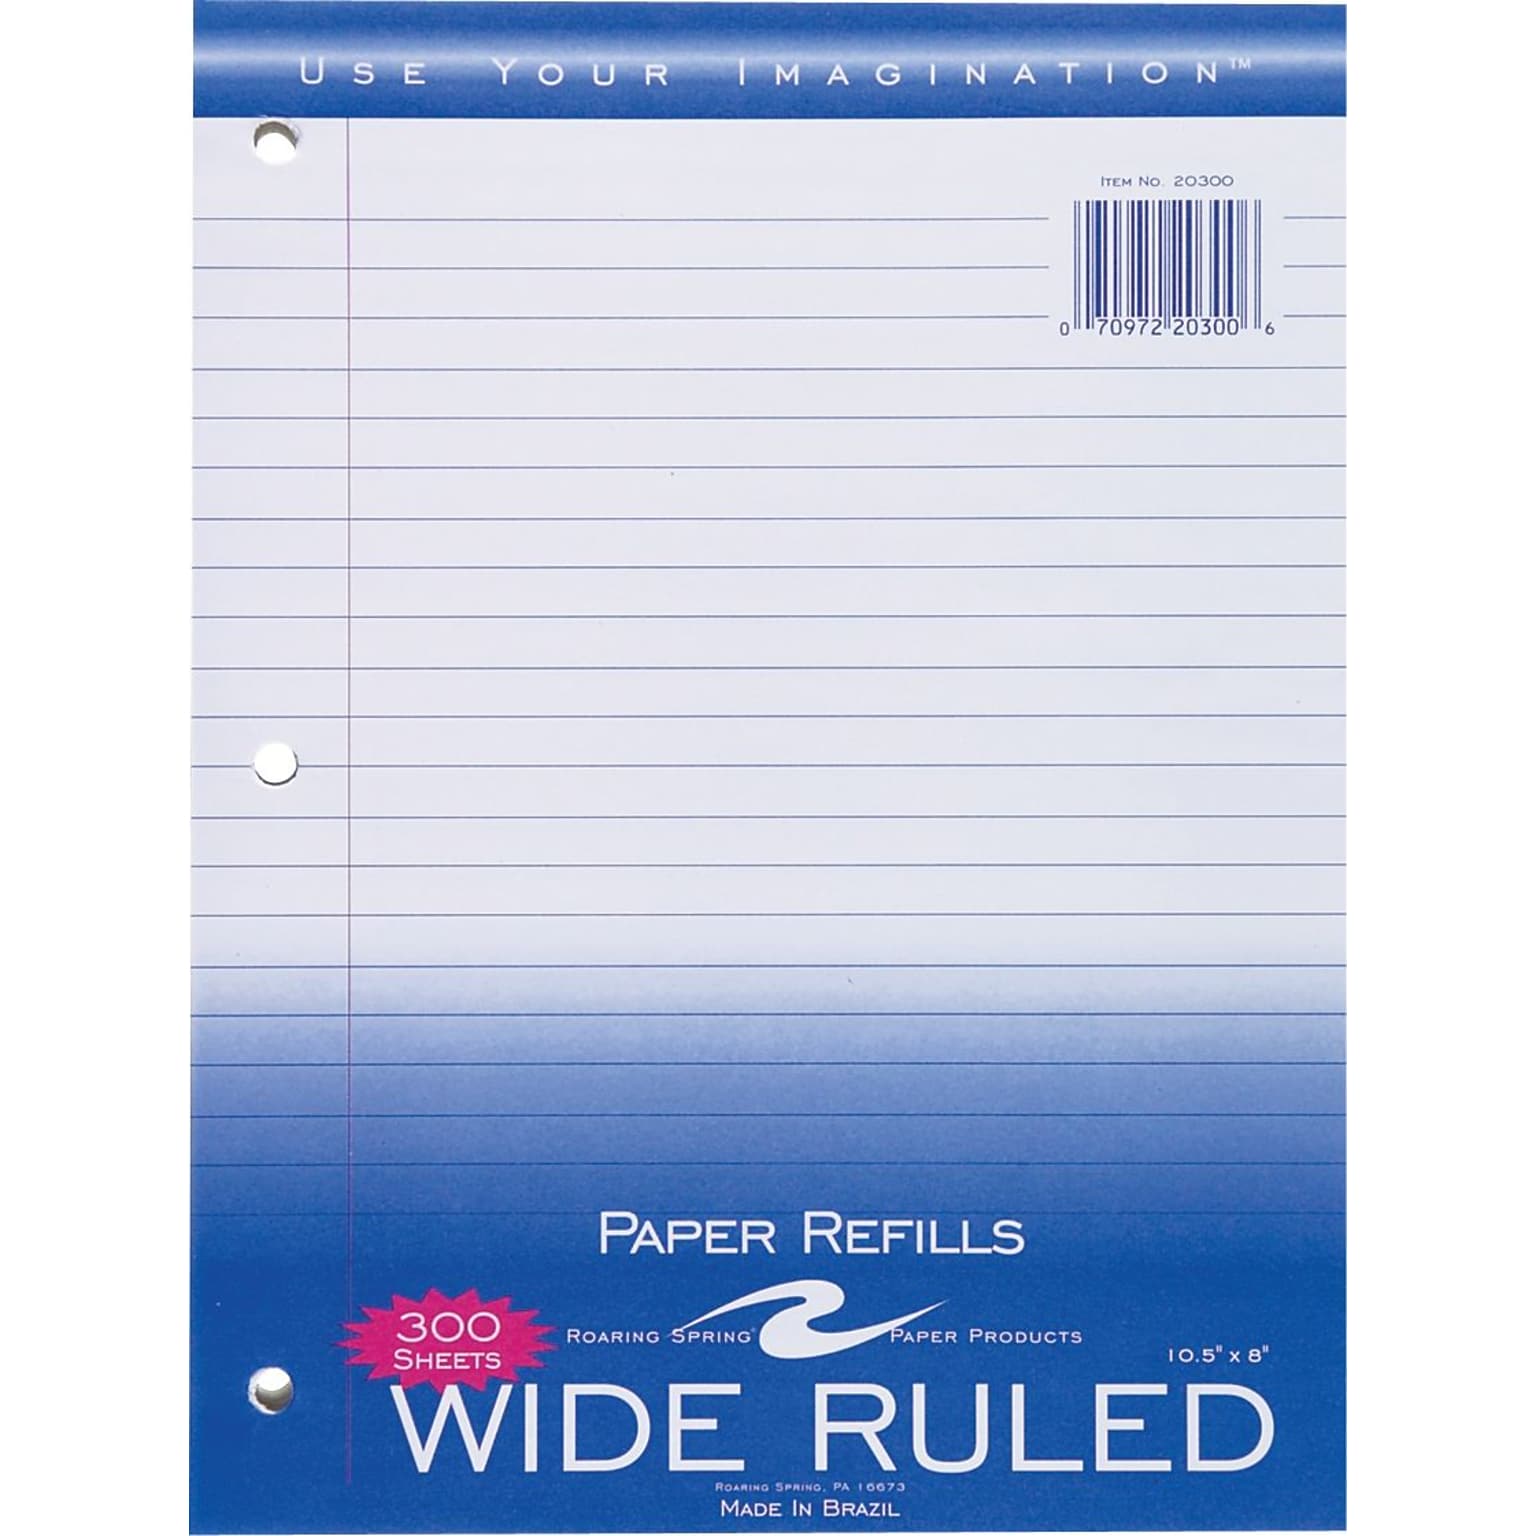 Roaring Spring Paper Products Wide Ruled Filler Paper, 8 x 10.5, 3-Hole Punched, 300 Sheets/Pack (20300)